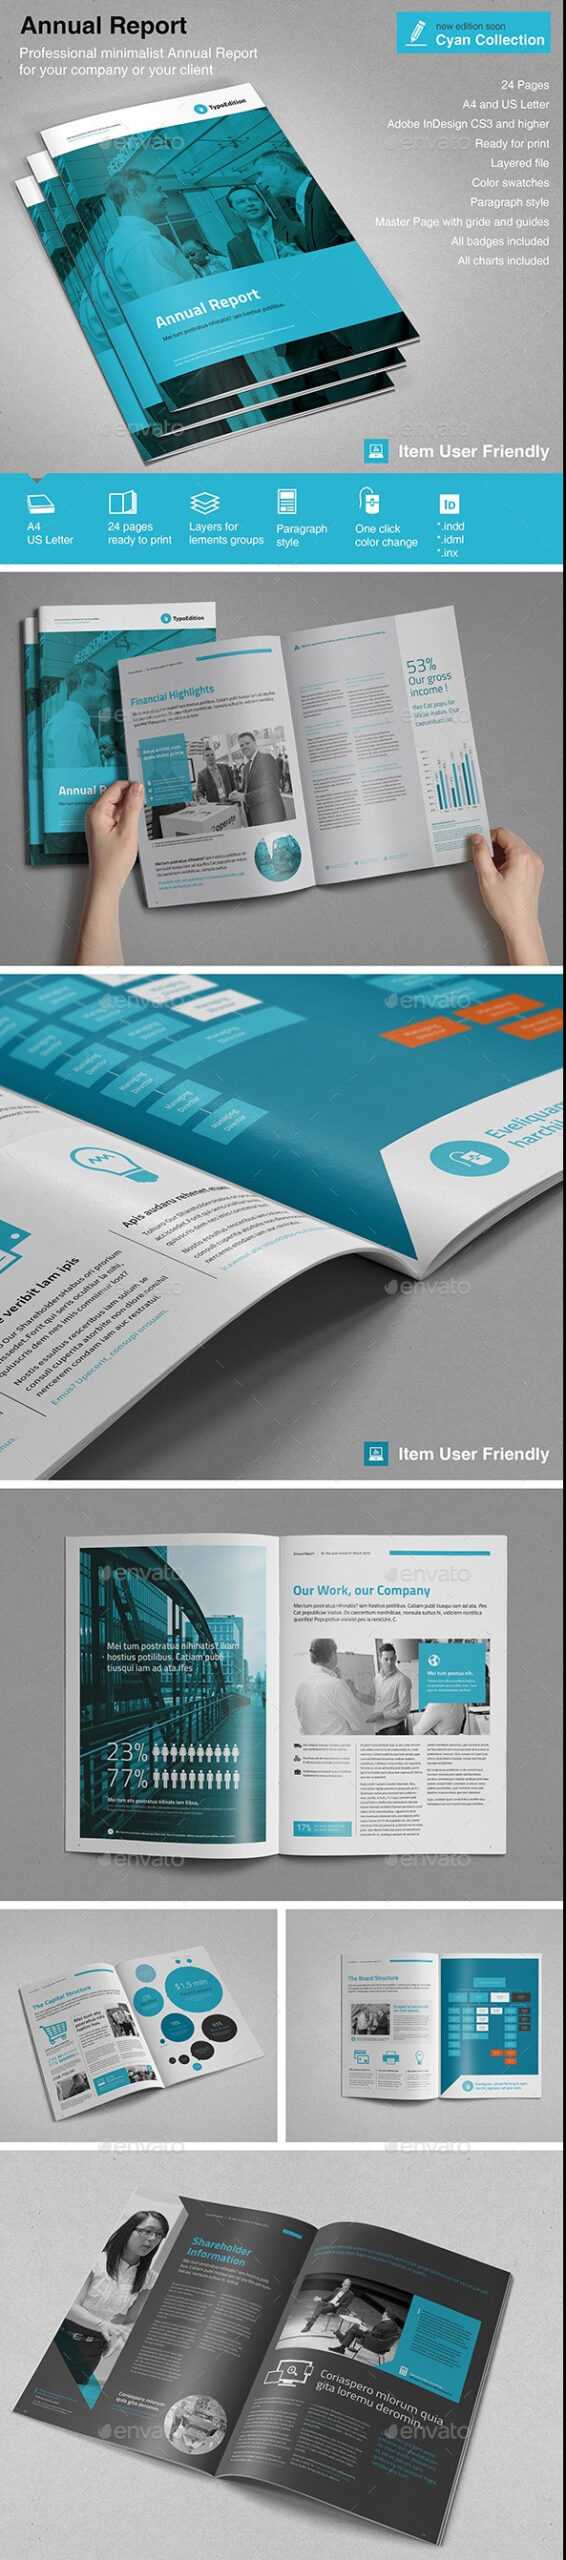 32+ Indesign Annual Report Templates For Corporate Pertaining To Free Annual Report Template Indesign